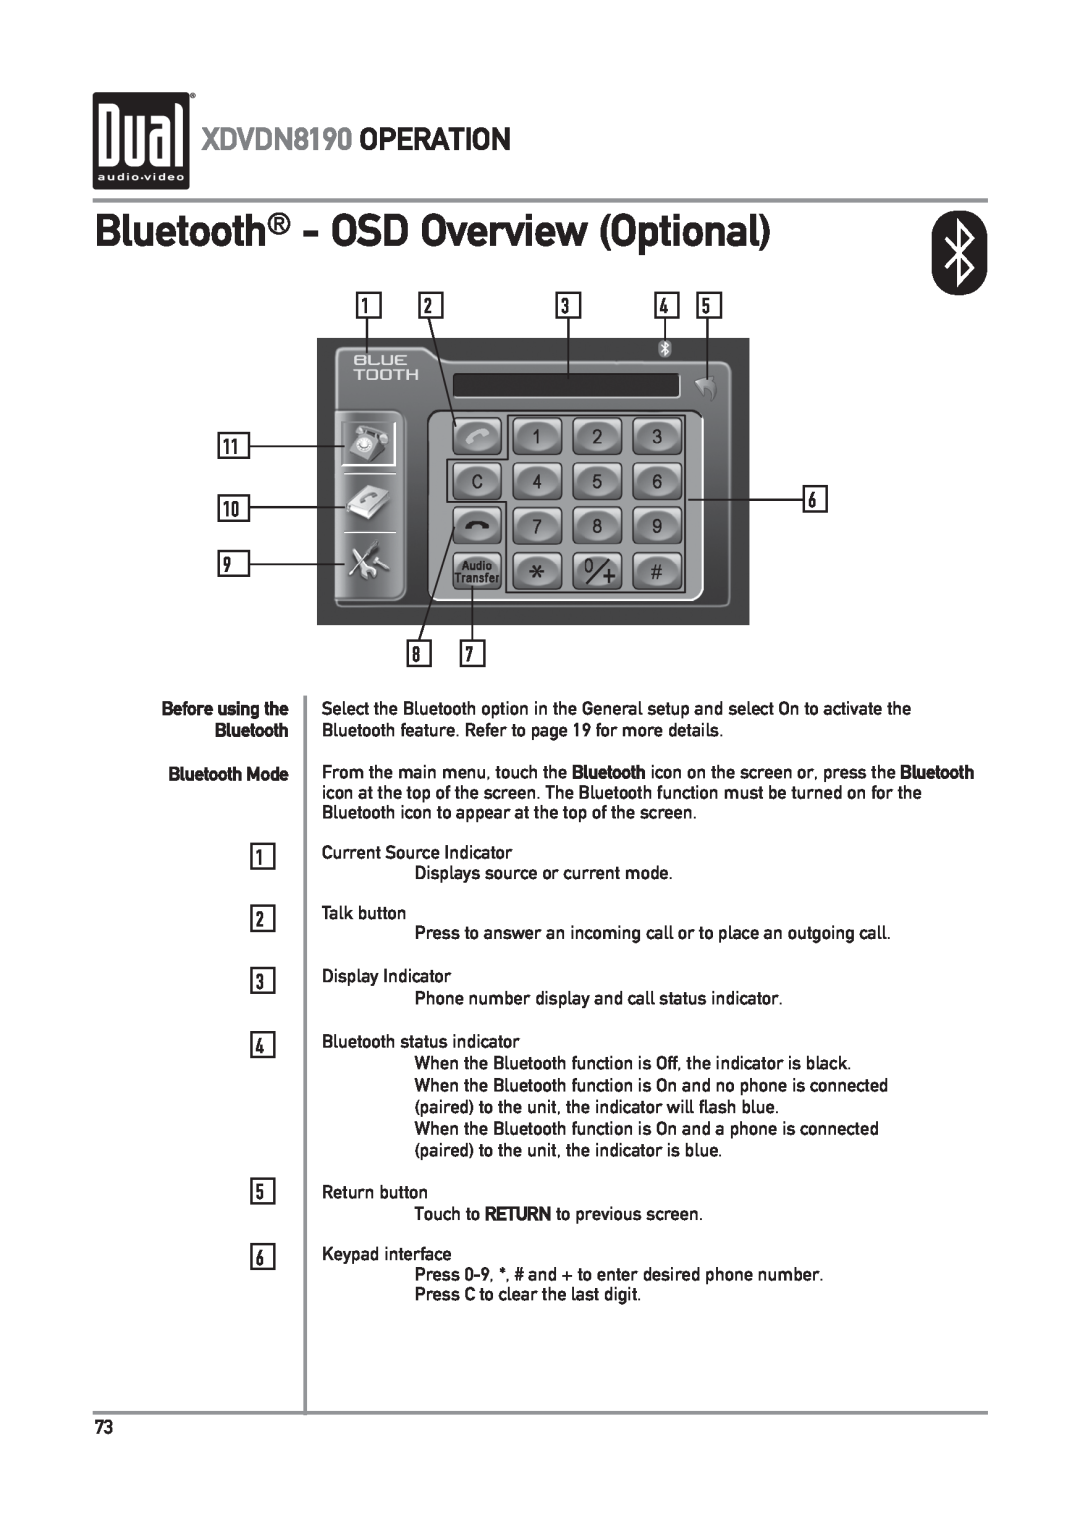 Dual owner manual Bluetooth - OSD Overview Optional, XDVDN8190 OPERATION, Bluetooth Mode 